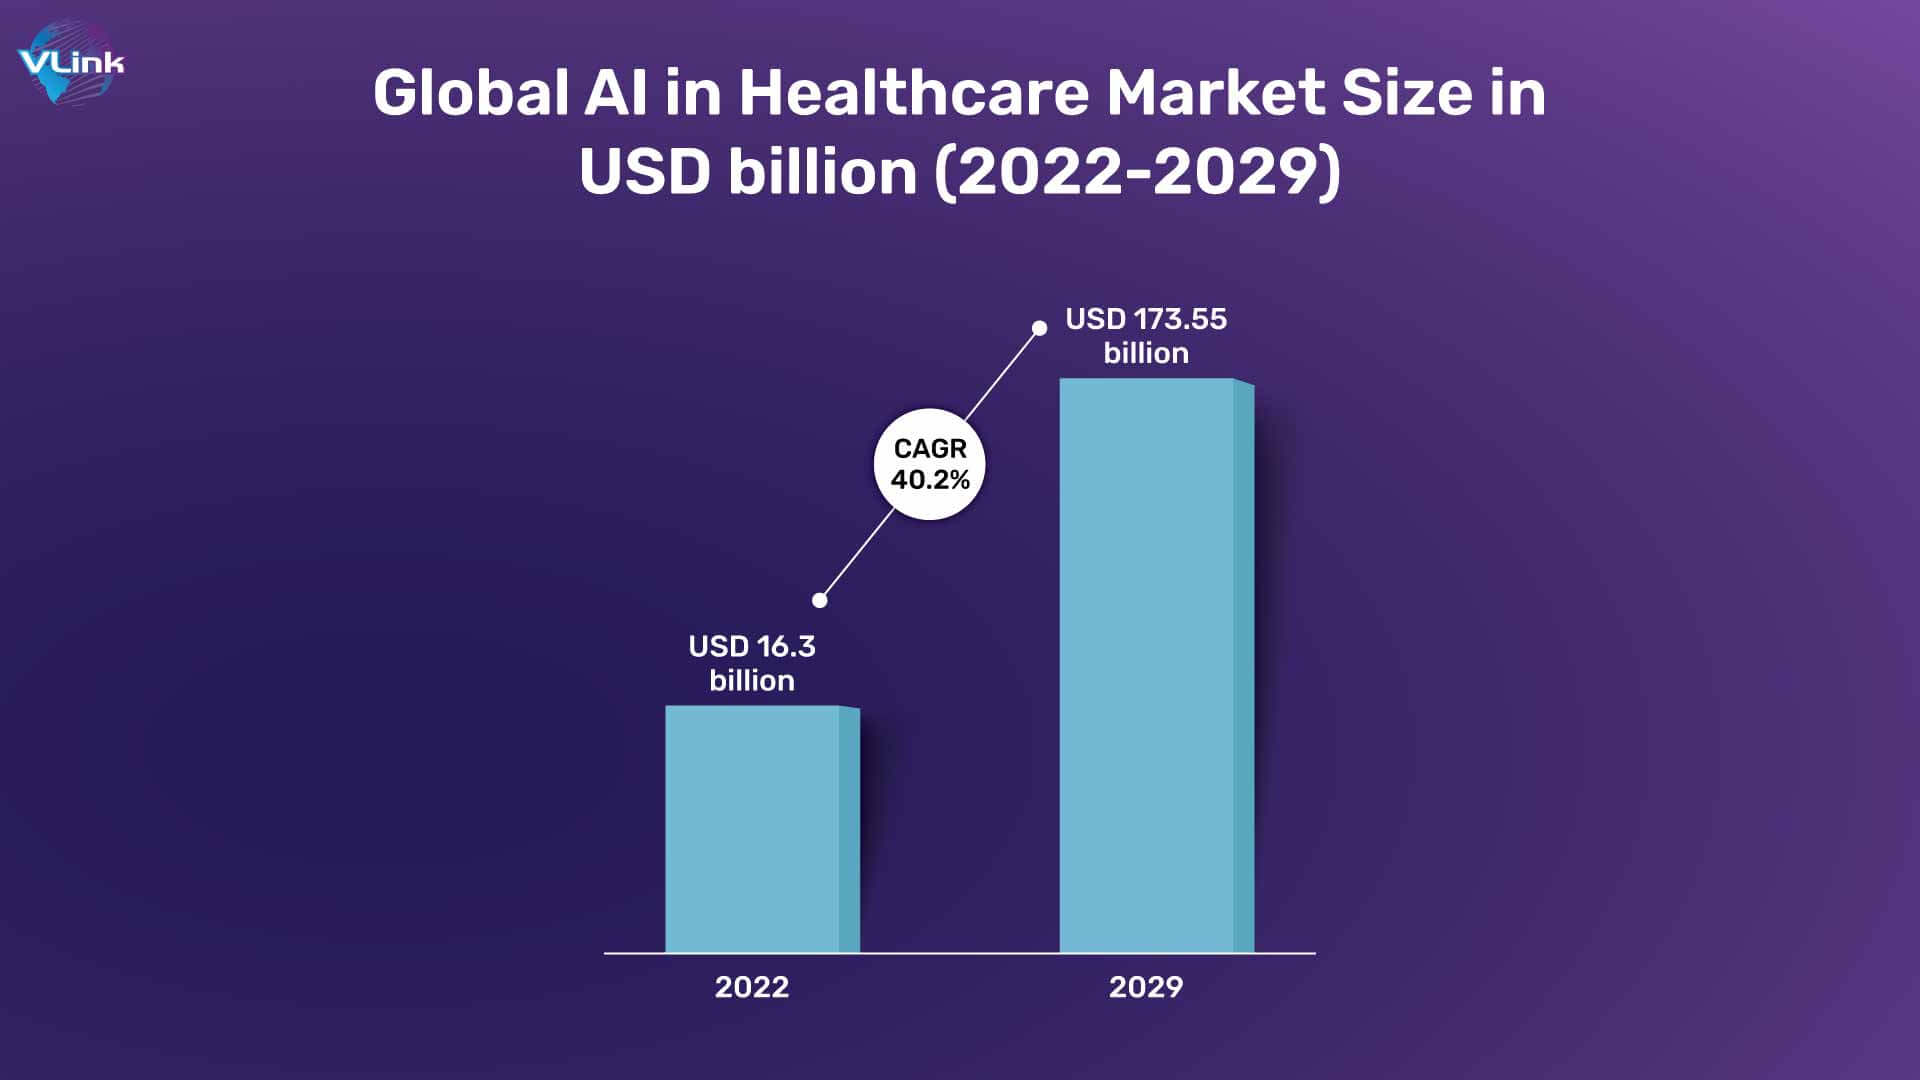 The global AI in healthcare market